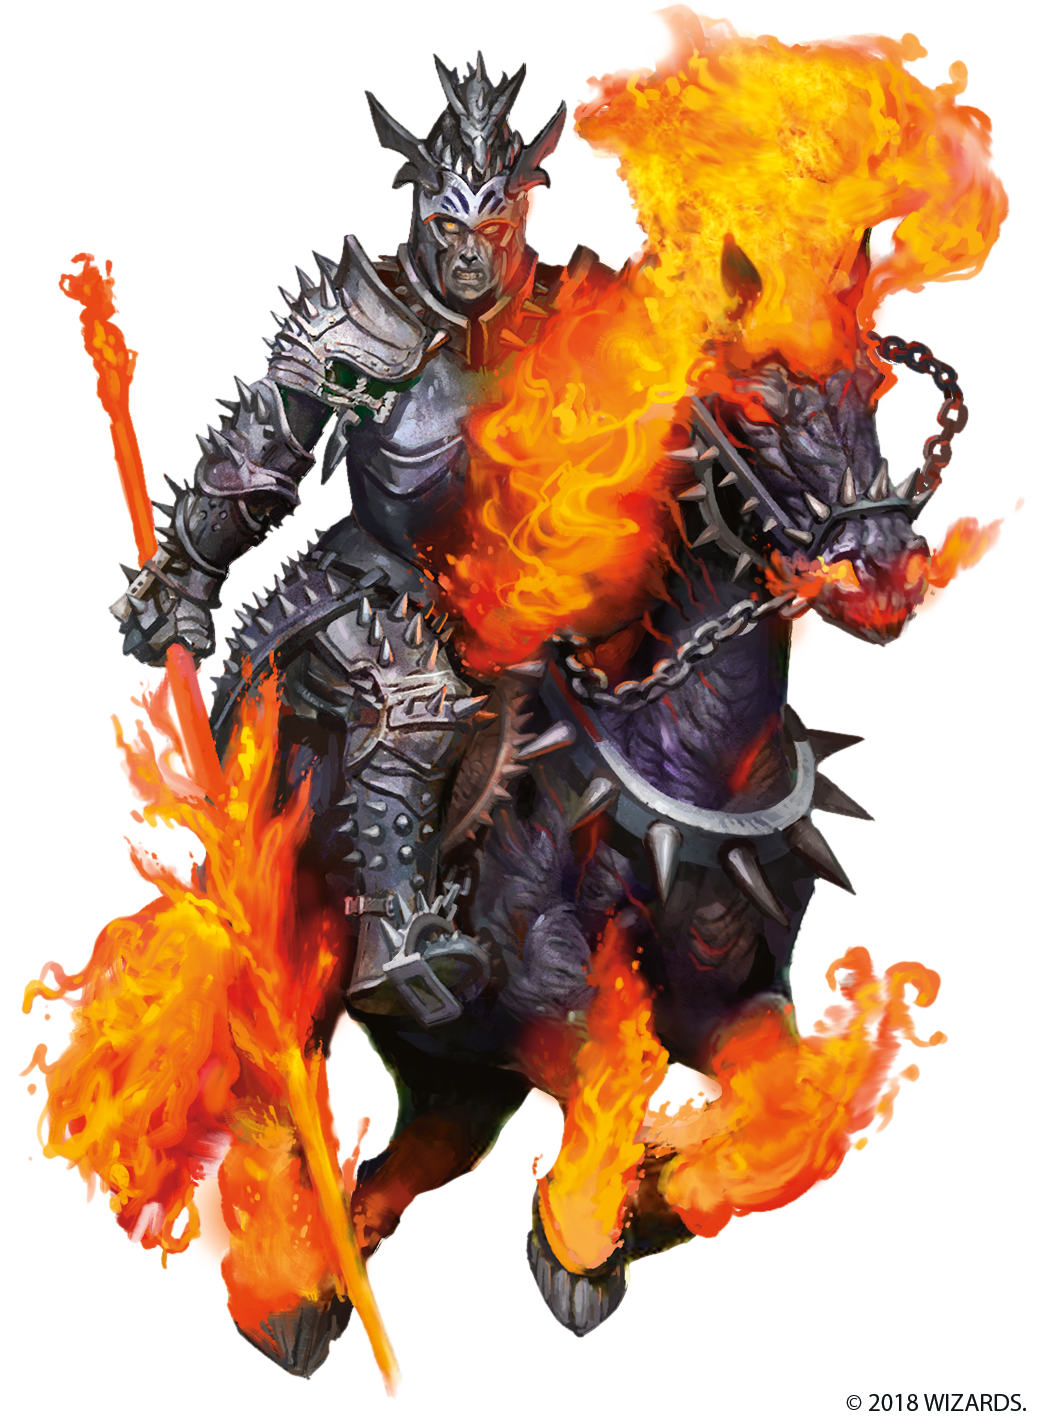 Get A Downright Demonic Look At The Devils And Cults You’ll Encounter In Dungeons & Dragons’ New Sourcebook